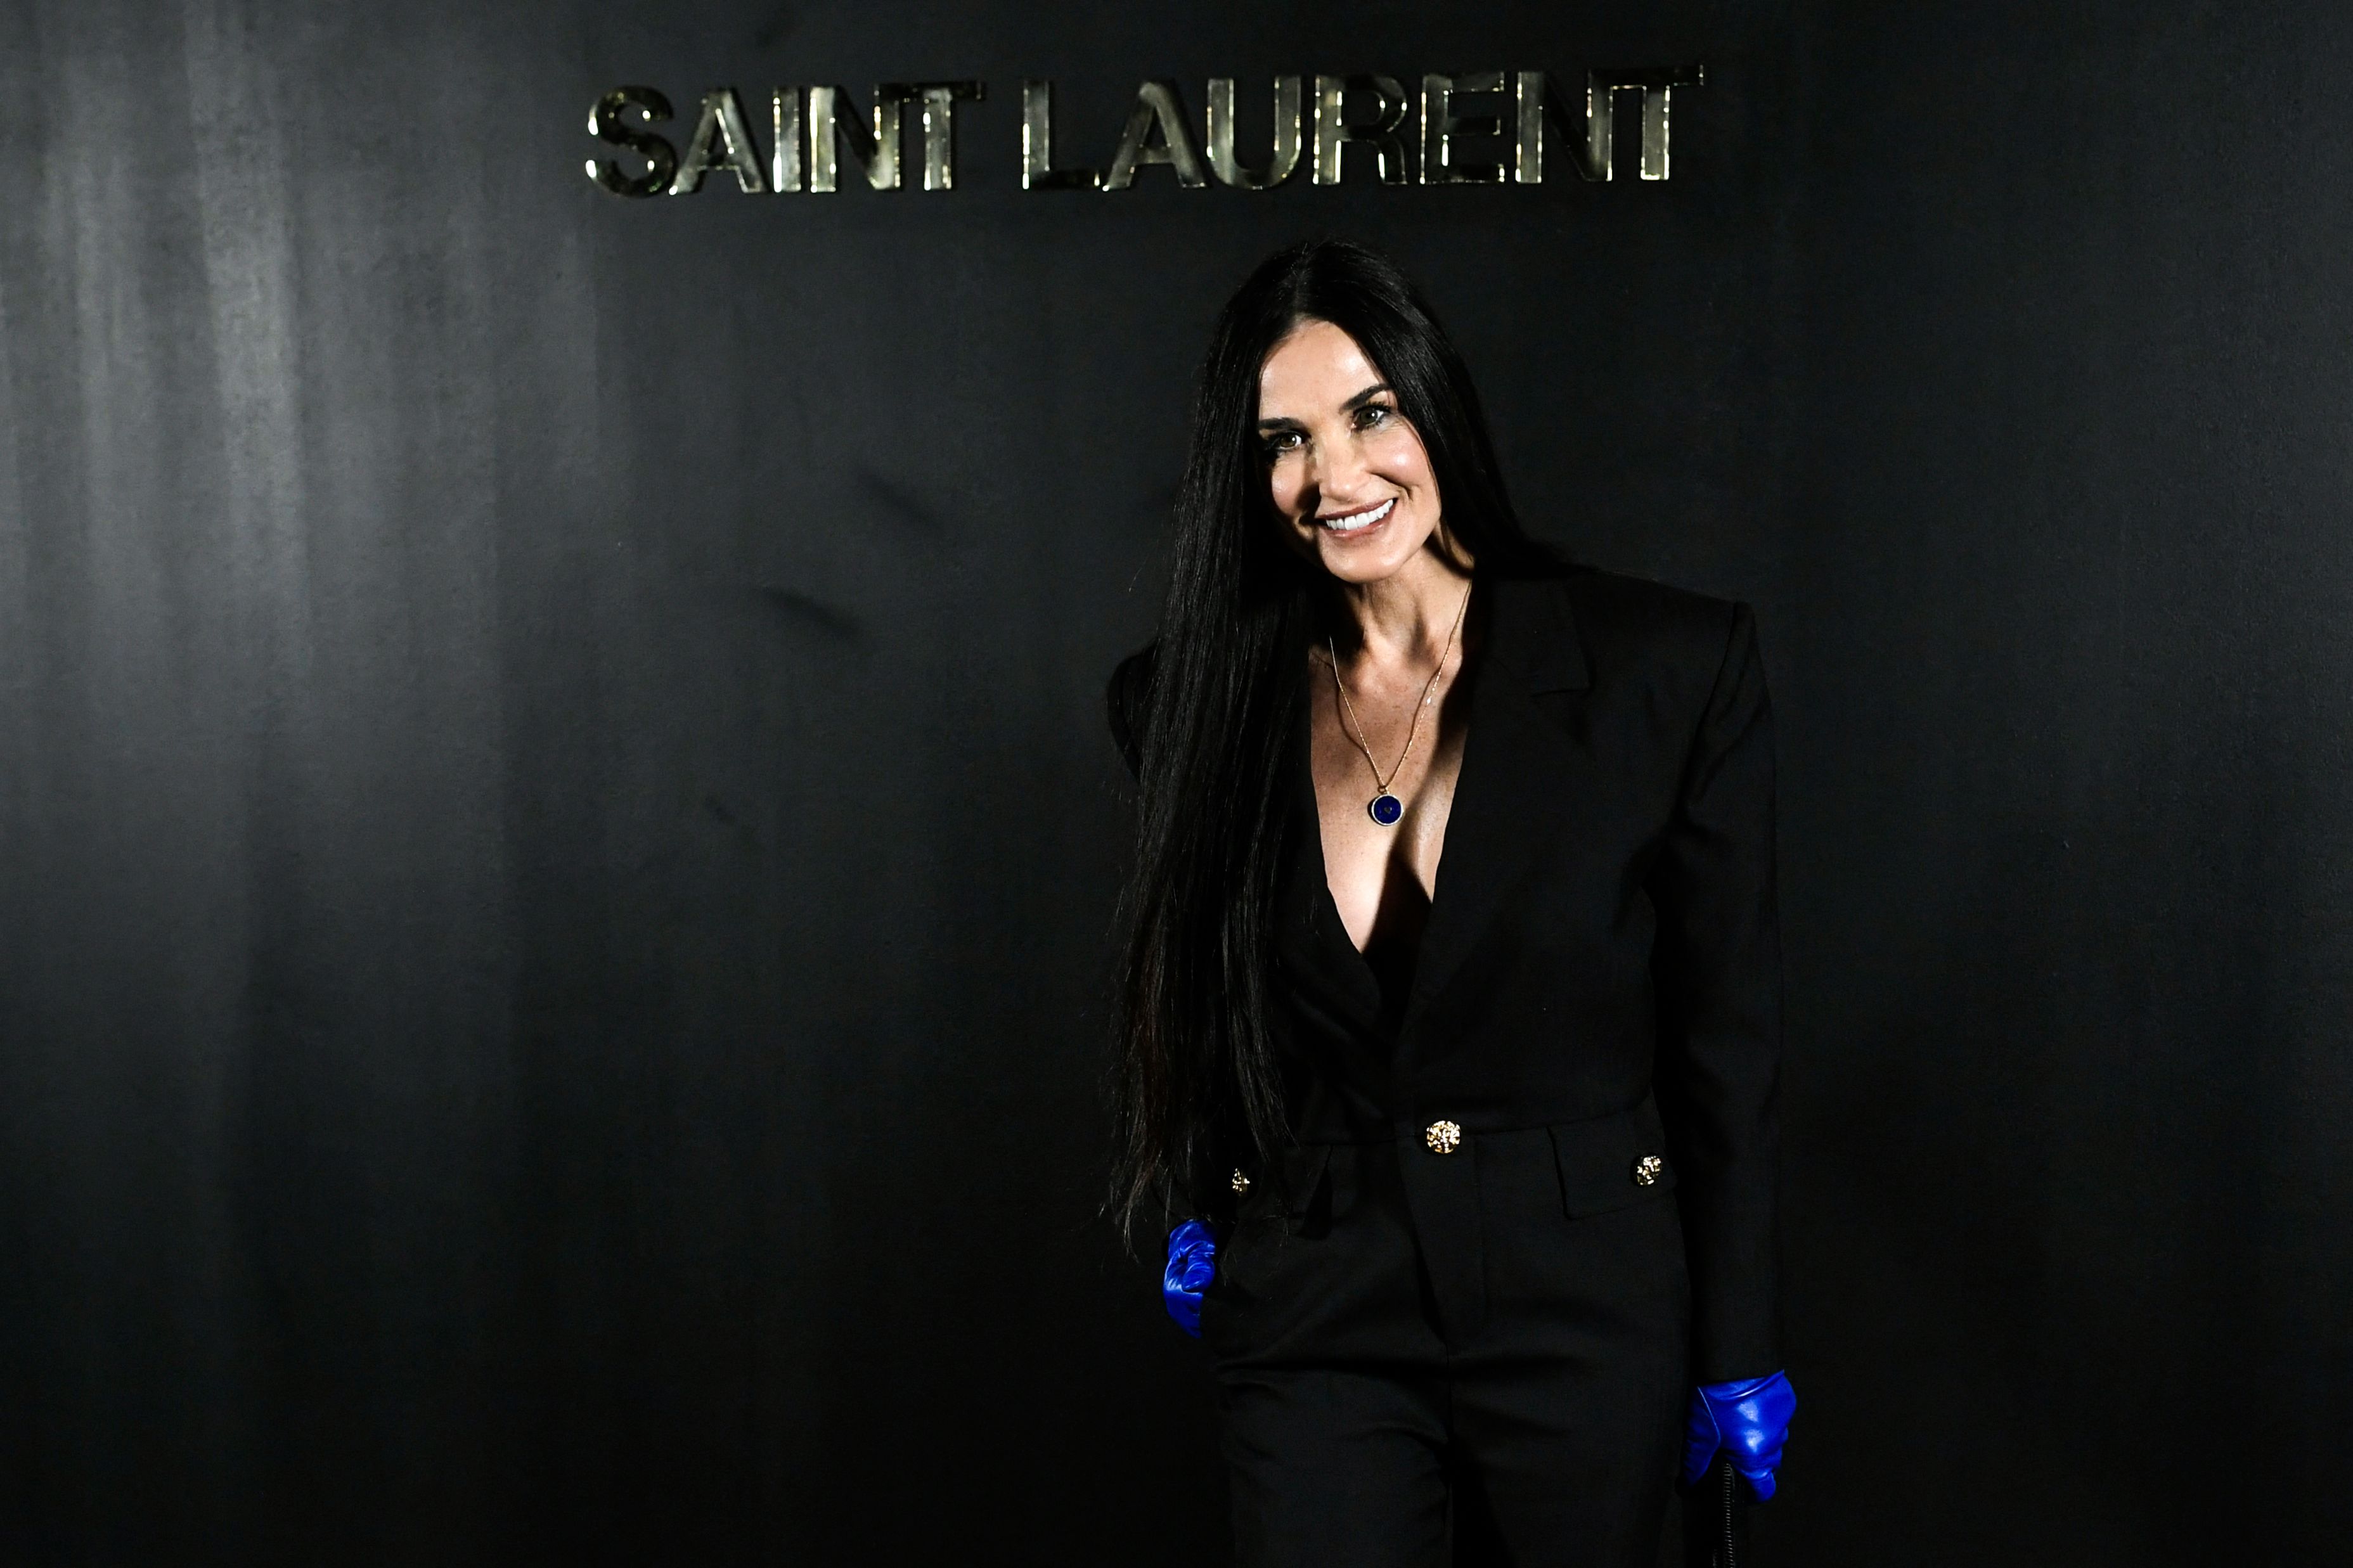 Demi Moore, whose real name is Demi Gene Guynes and has been married three times, poses for a photo at the Saint-Laurent Fall-Winter 2022-2023 show